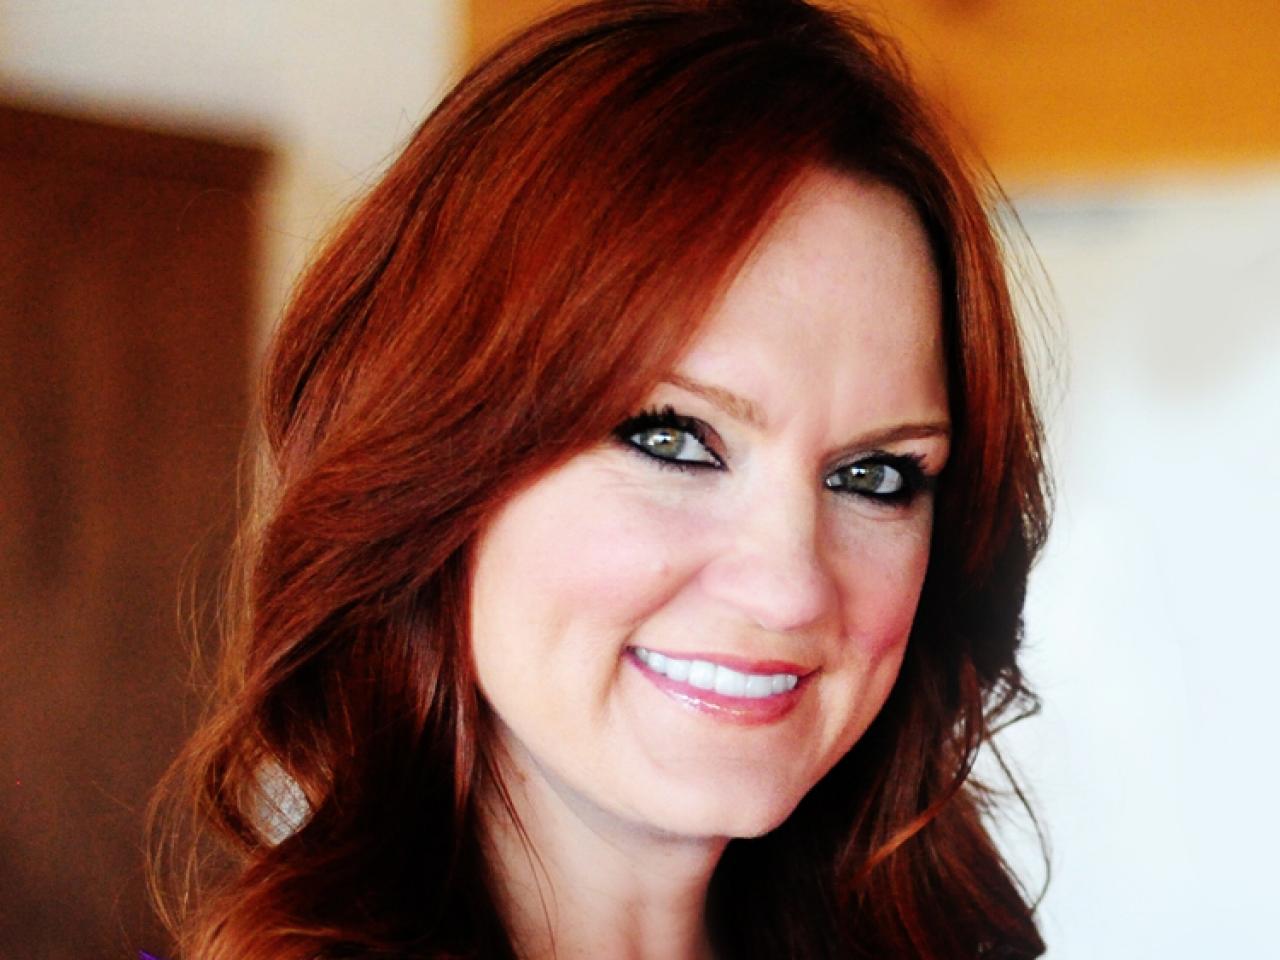 The Pioneer Woman: Behind the Scenes with Ree Drummond, The Pioneer Woman,  hosted by Ree Drummond